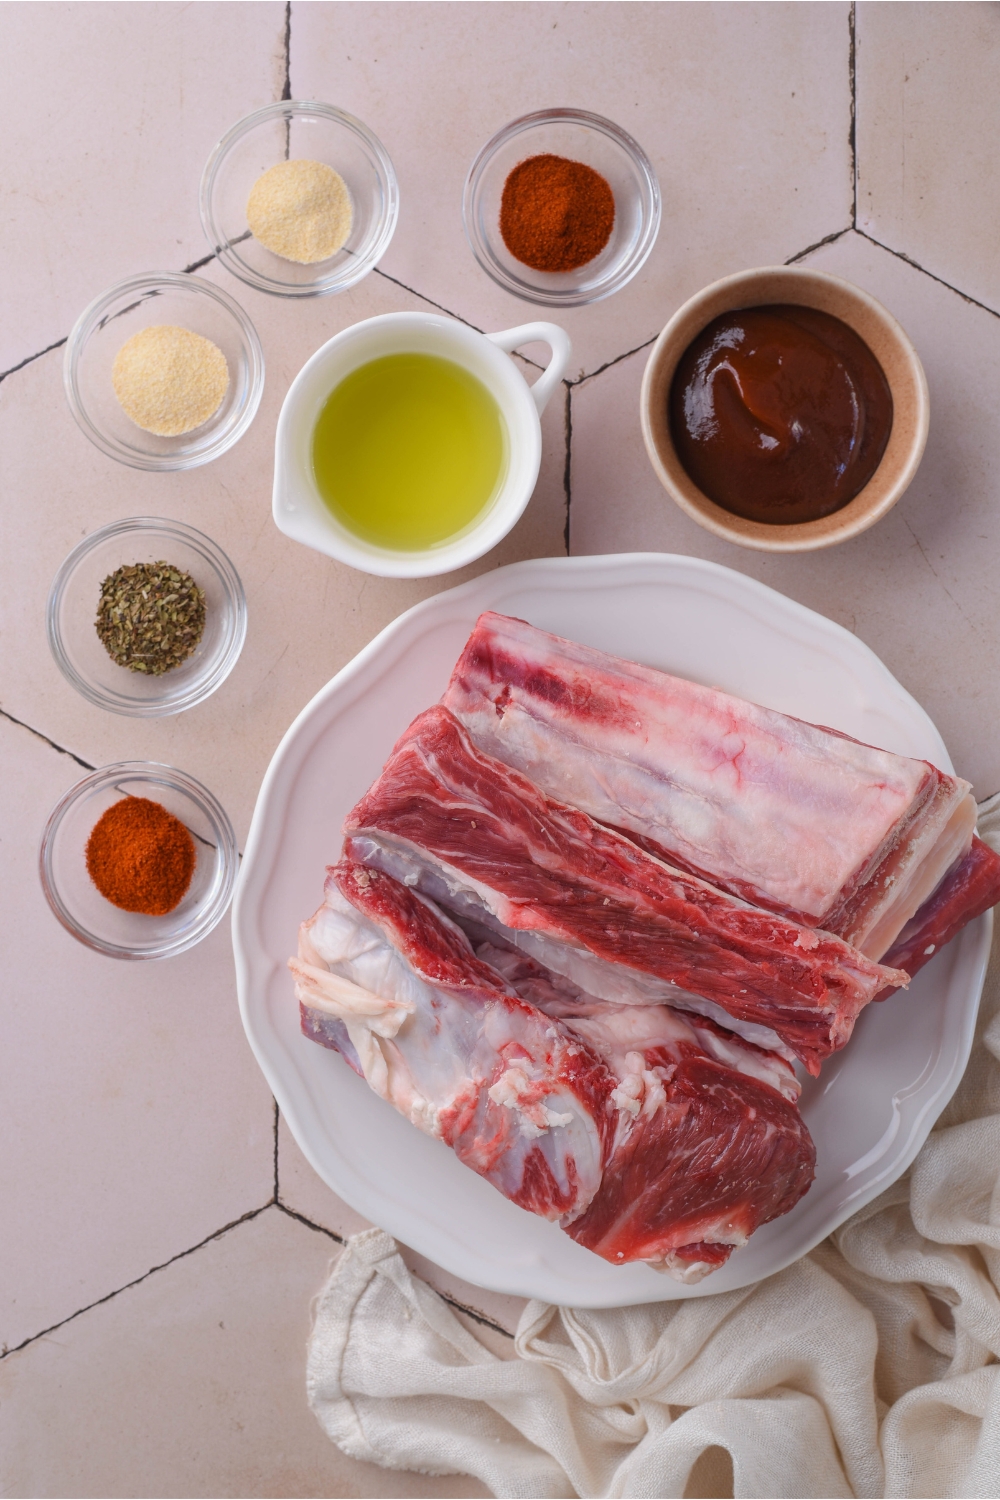 An assortment of ingredients including a plate of raw beef ribs and bowls of oil, spices, and barbecue sauce.